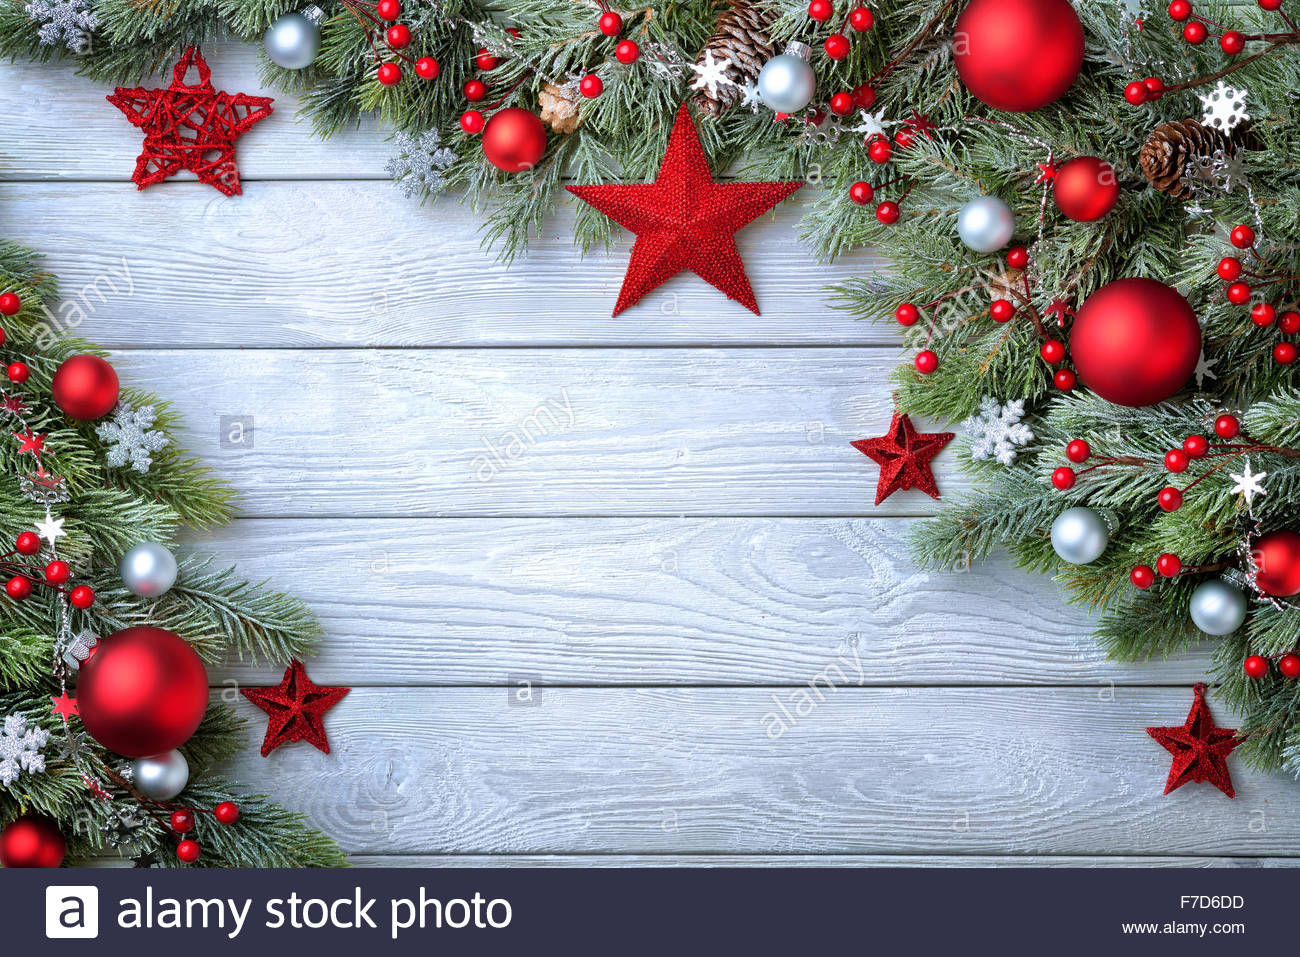 Christmas background with blue wooden board and fir branches Stock